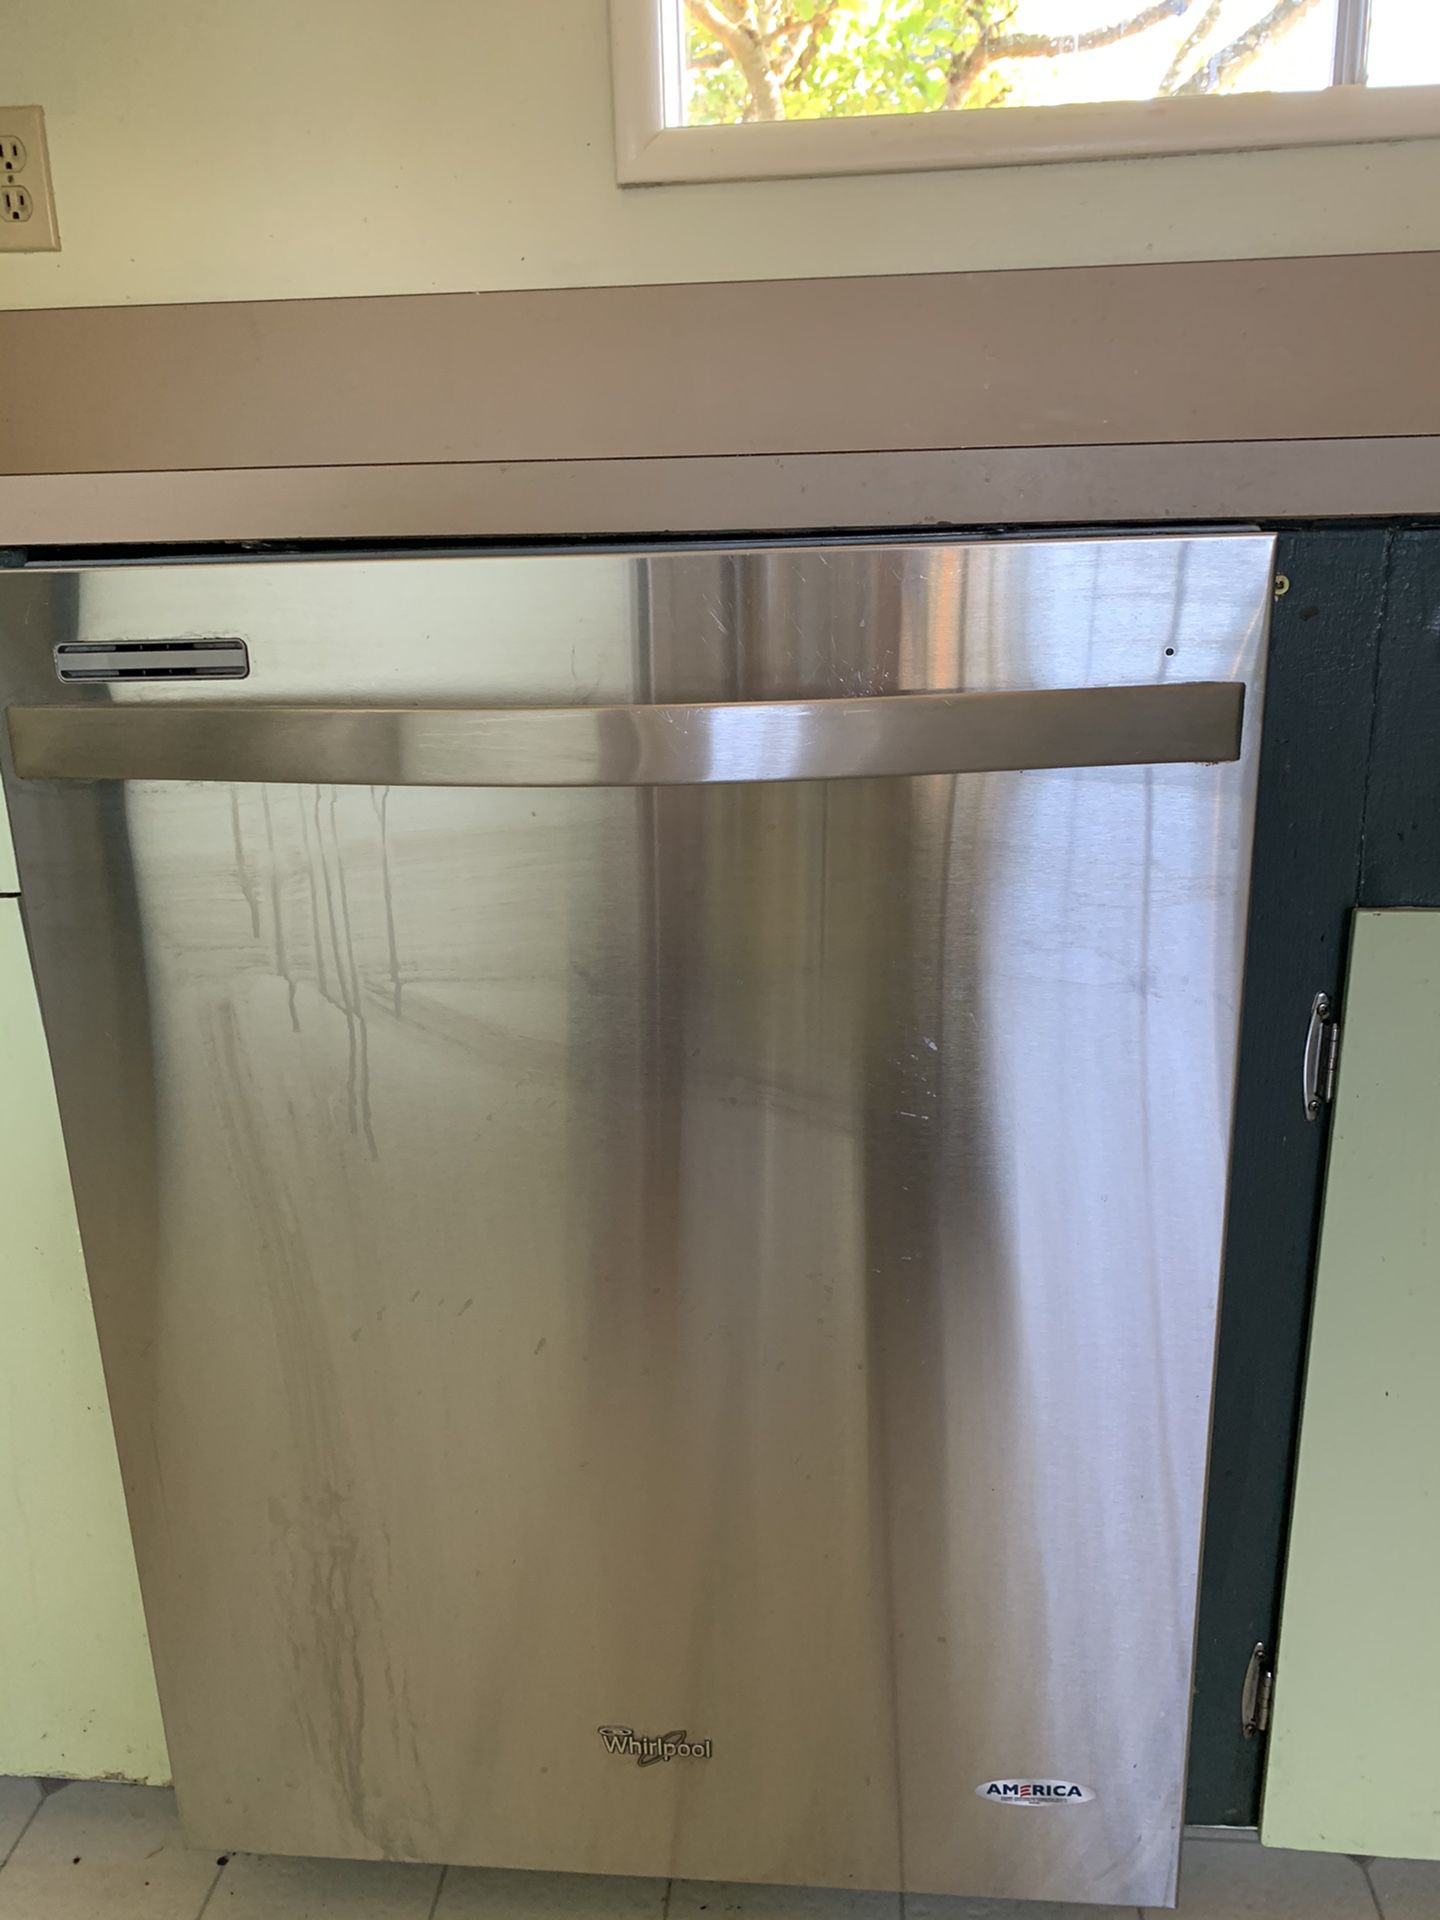 Stainless steel Used whirlpool dishwasher